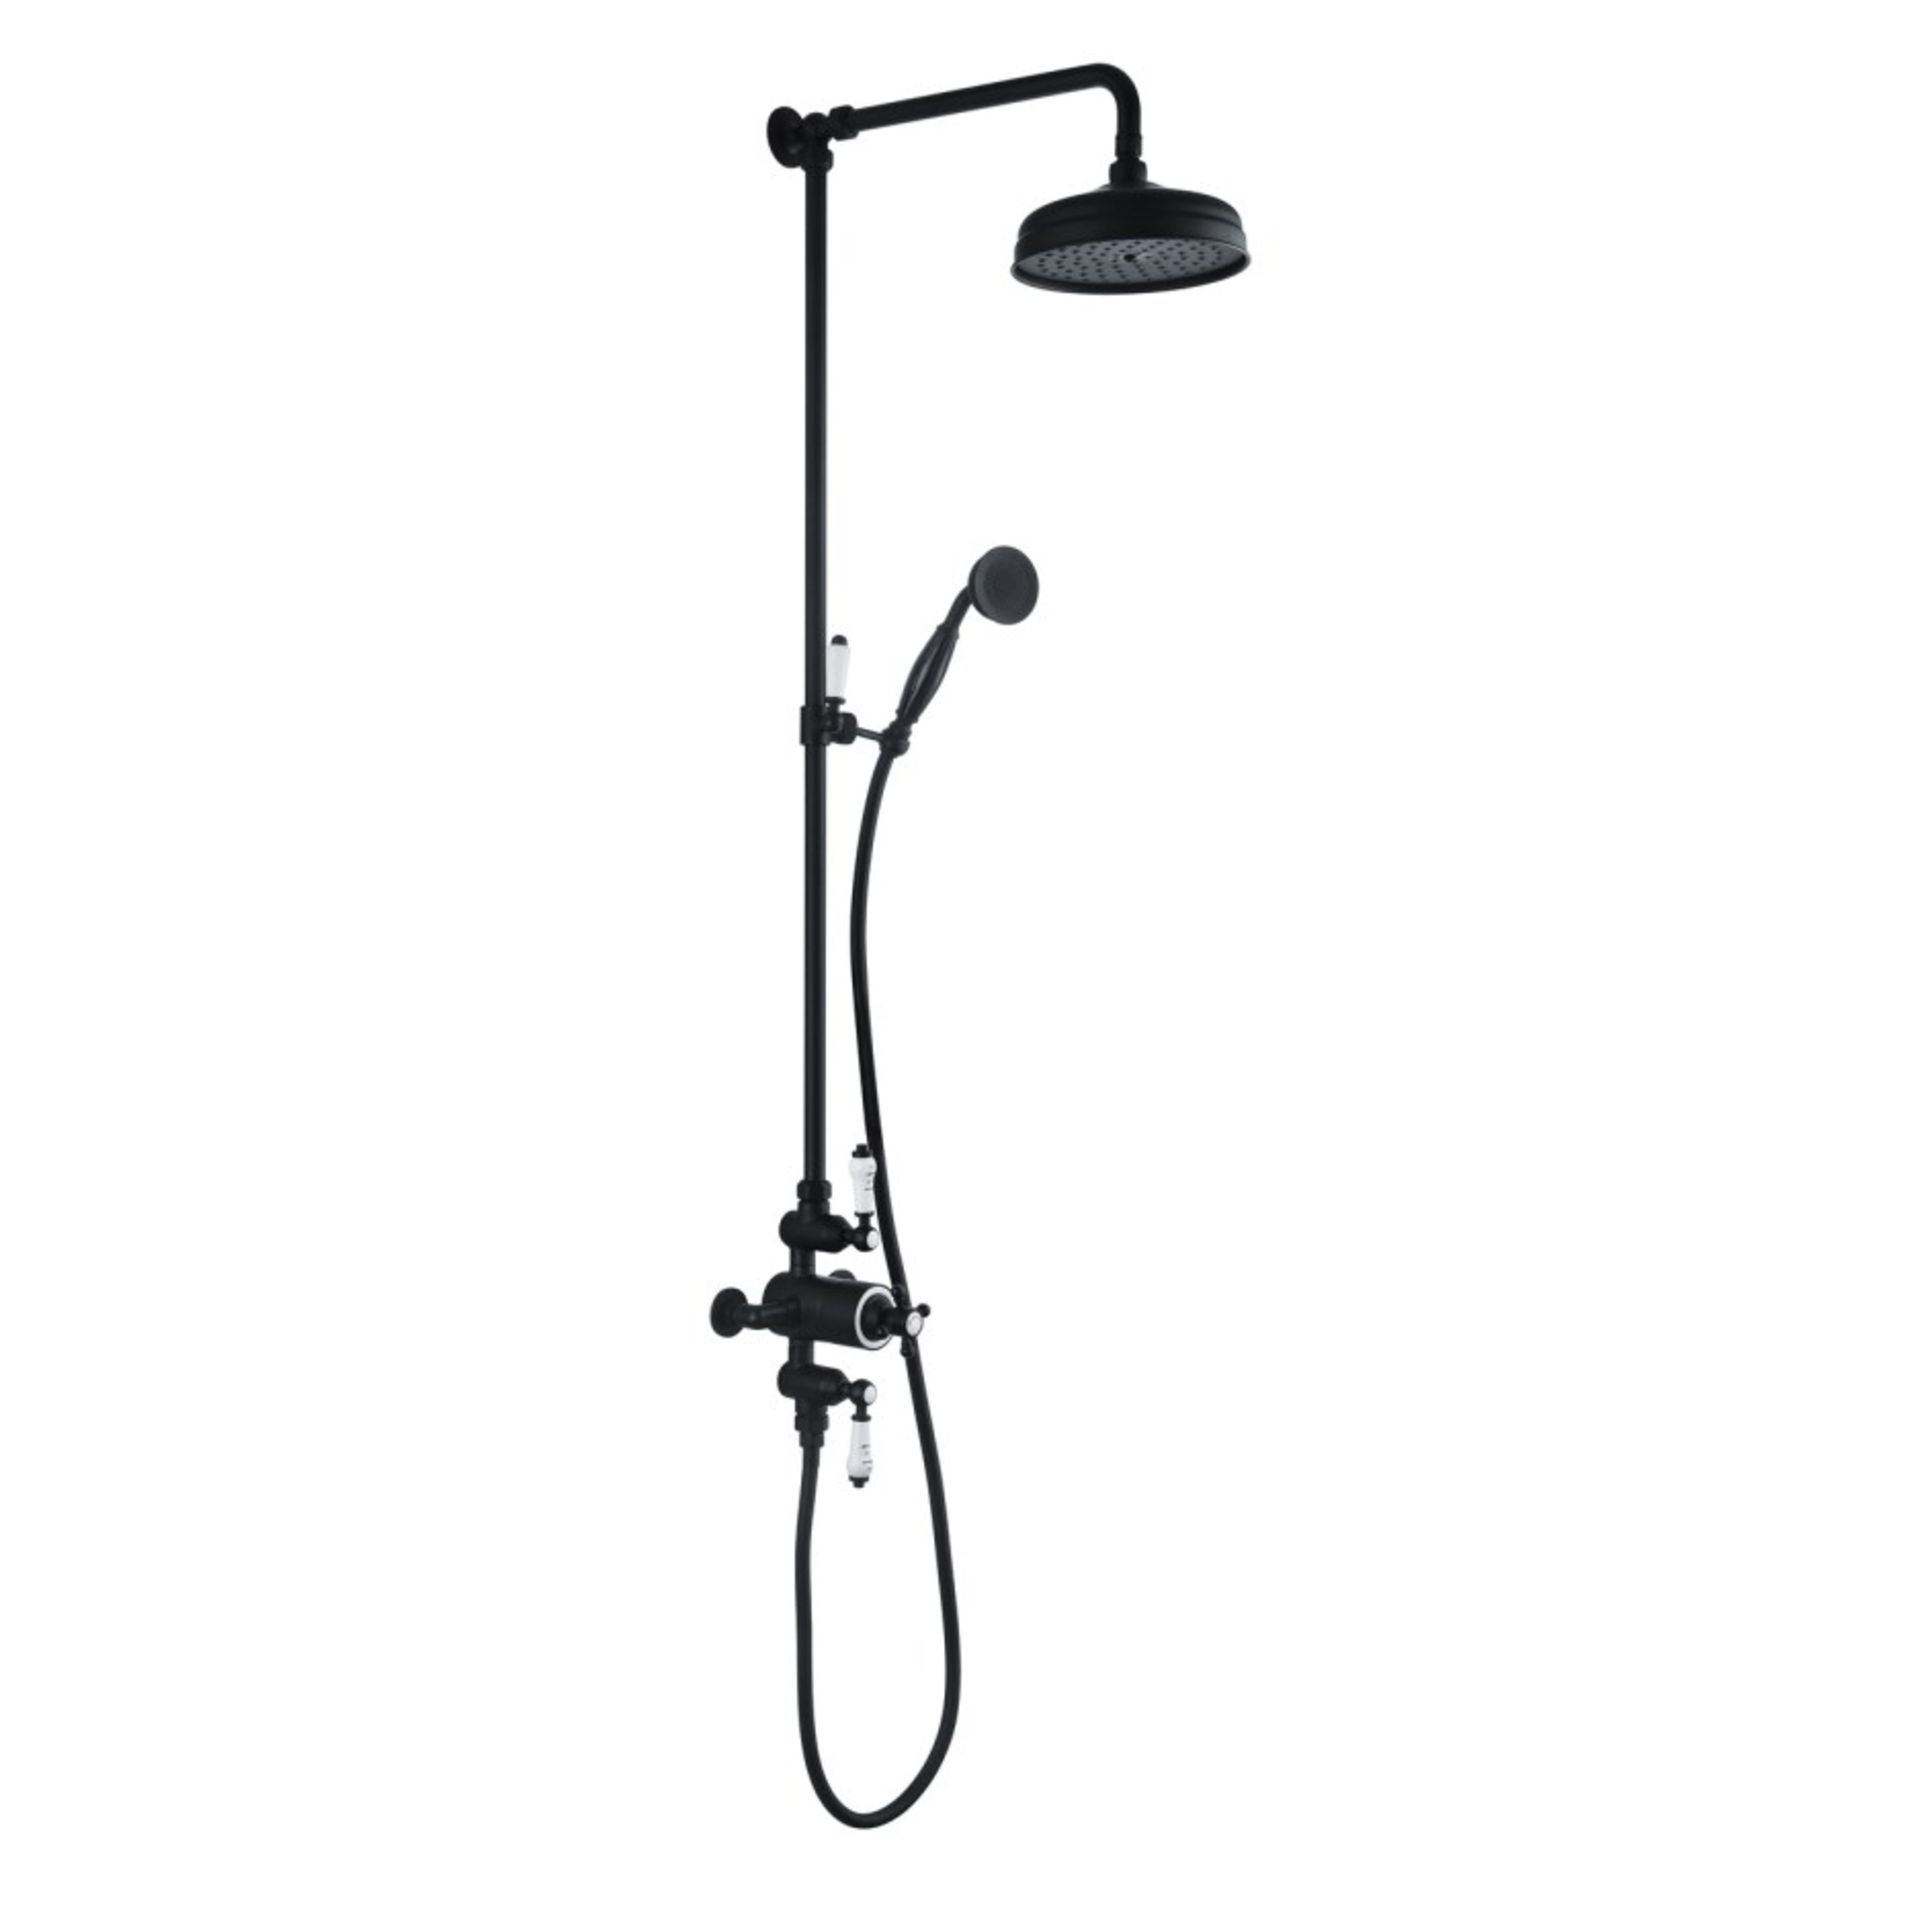 New & Boxed Black Traditional Thermostatic Exposed Mixer Shower Set. Sp6815B. 8" Head + Handse... - Image 2 of 2